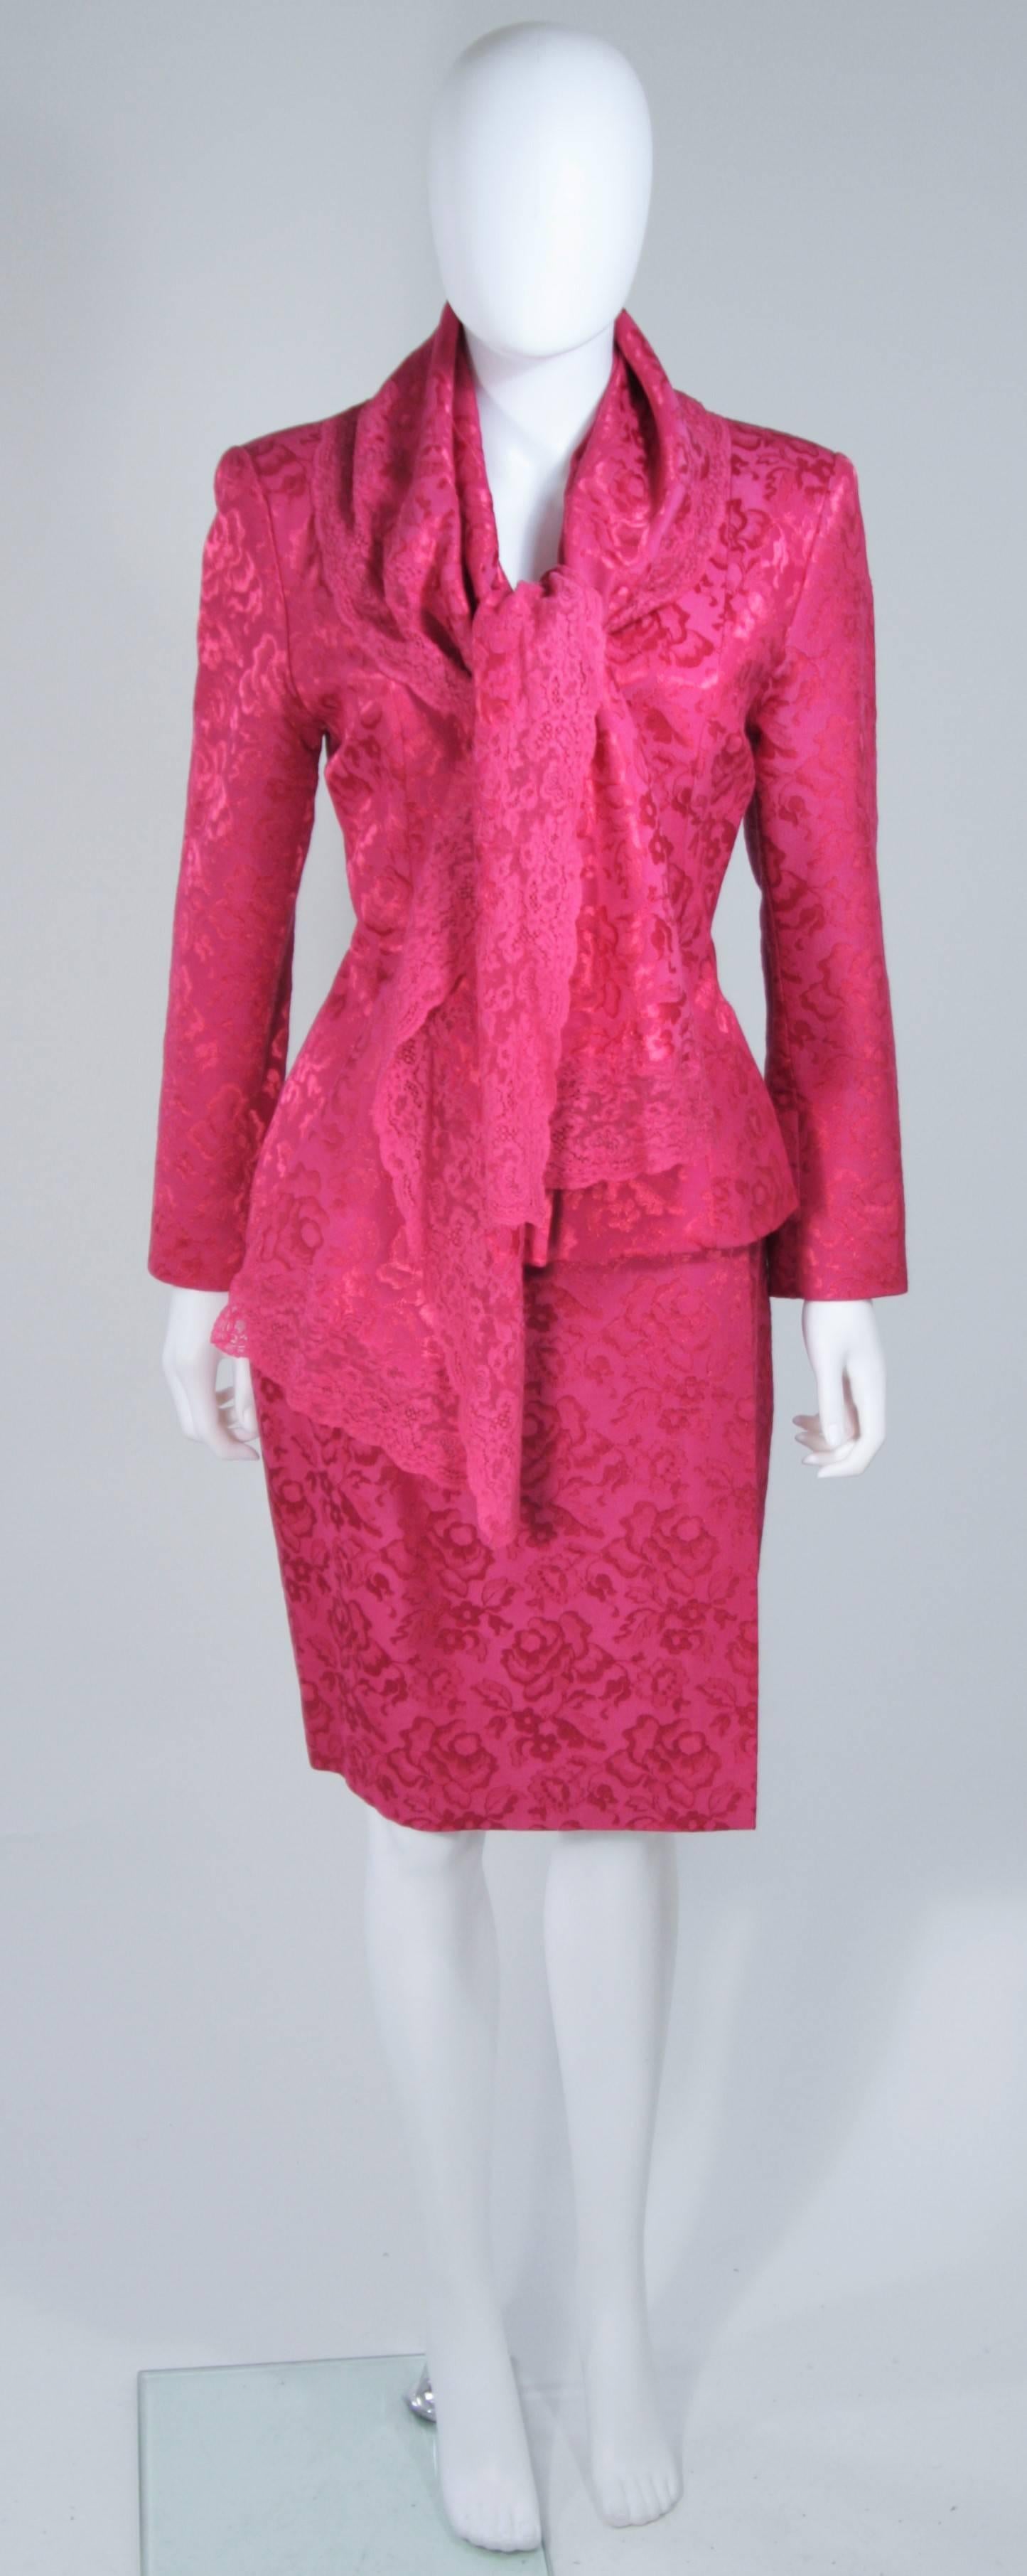  This Christian Dior ensemble is composed of a pink wool blend with floral patterning, lace trim, and silk lining. The jacket features a shawl style collar ad center front button closures. There is a wrap style skirt with button closures and classic